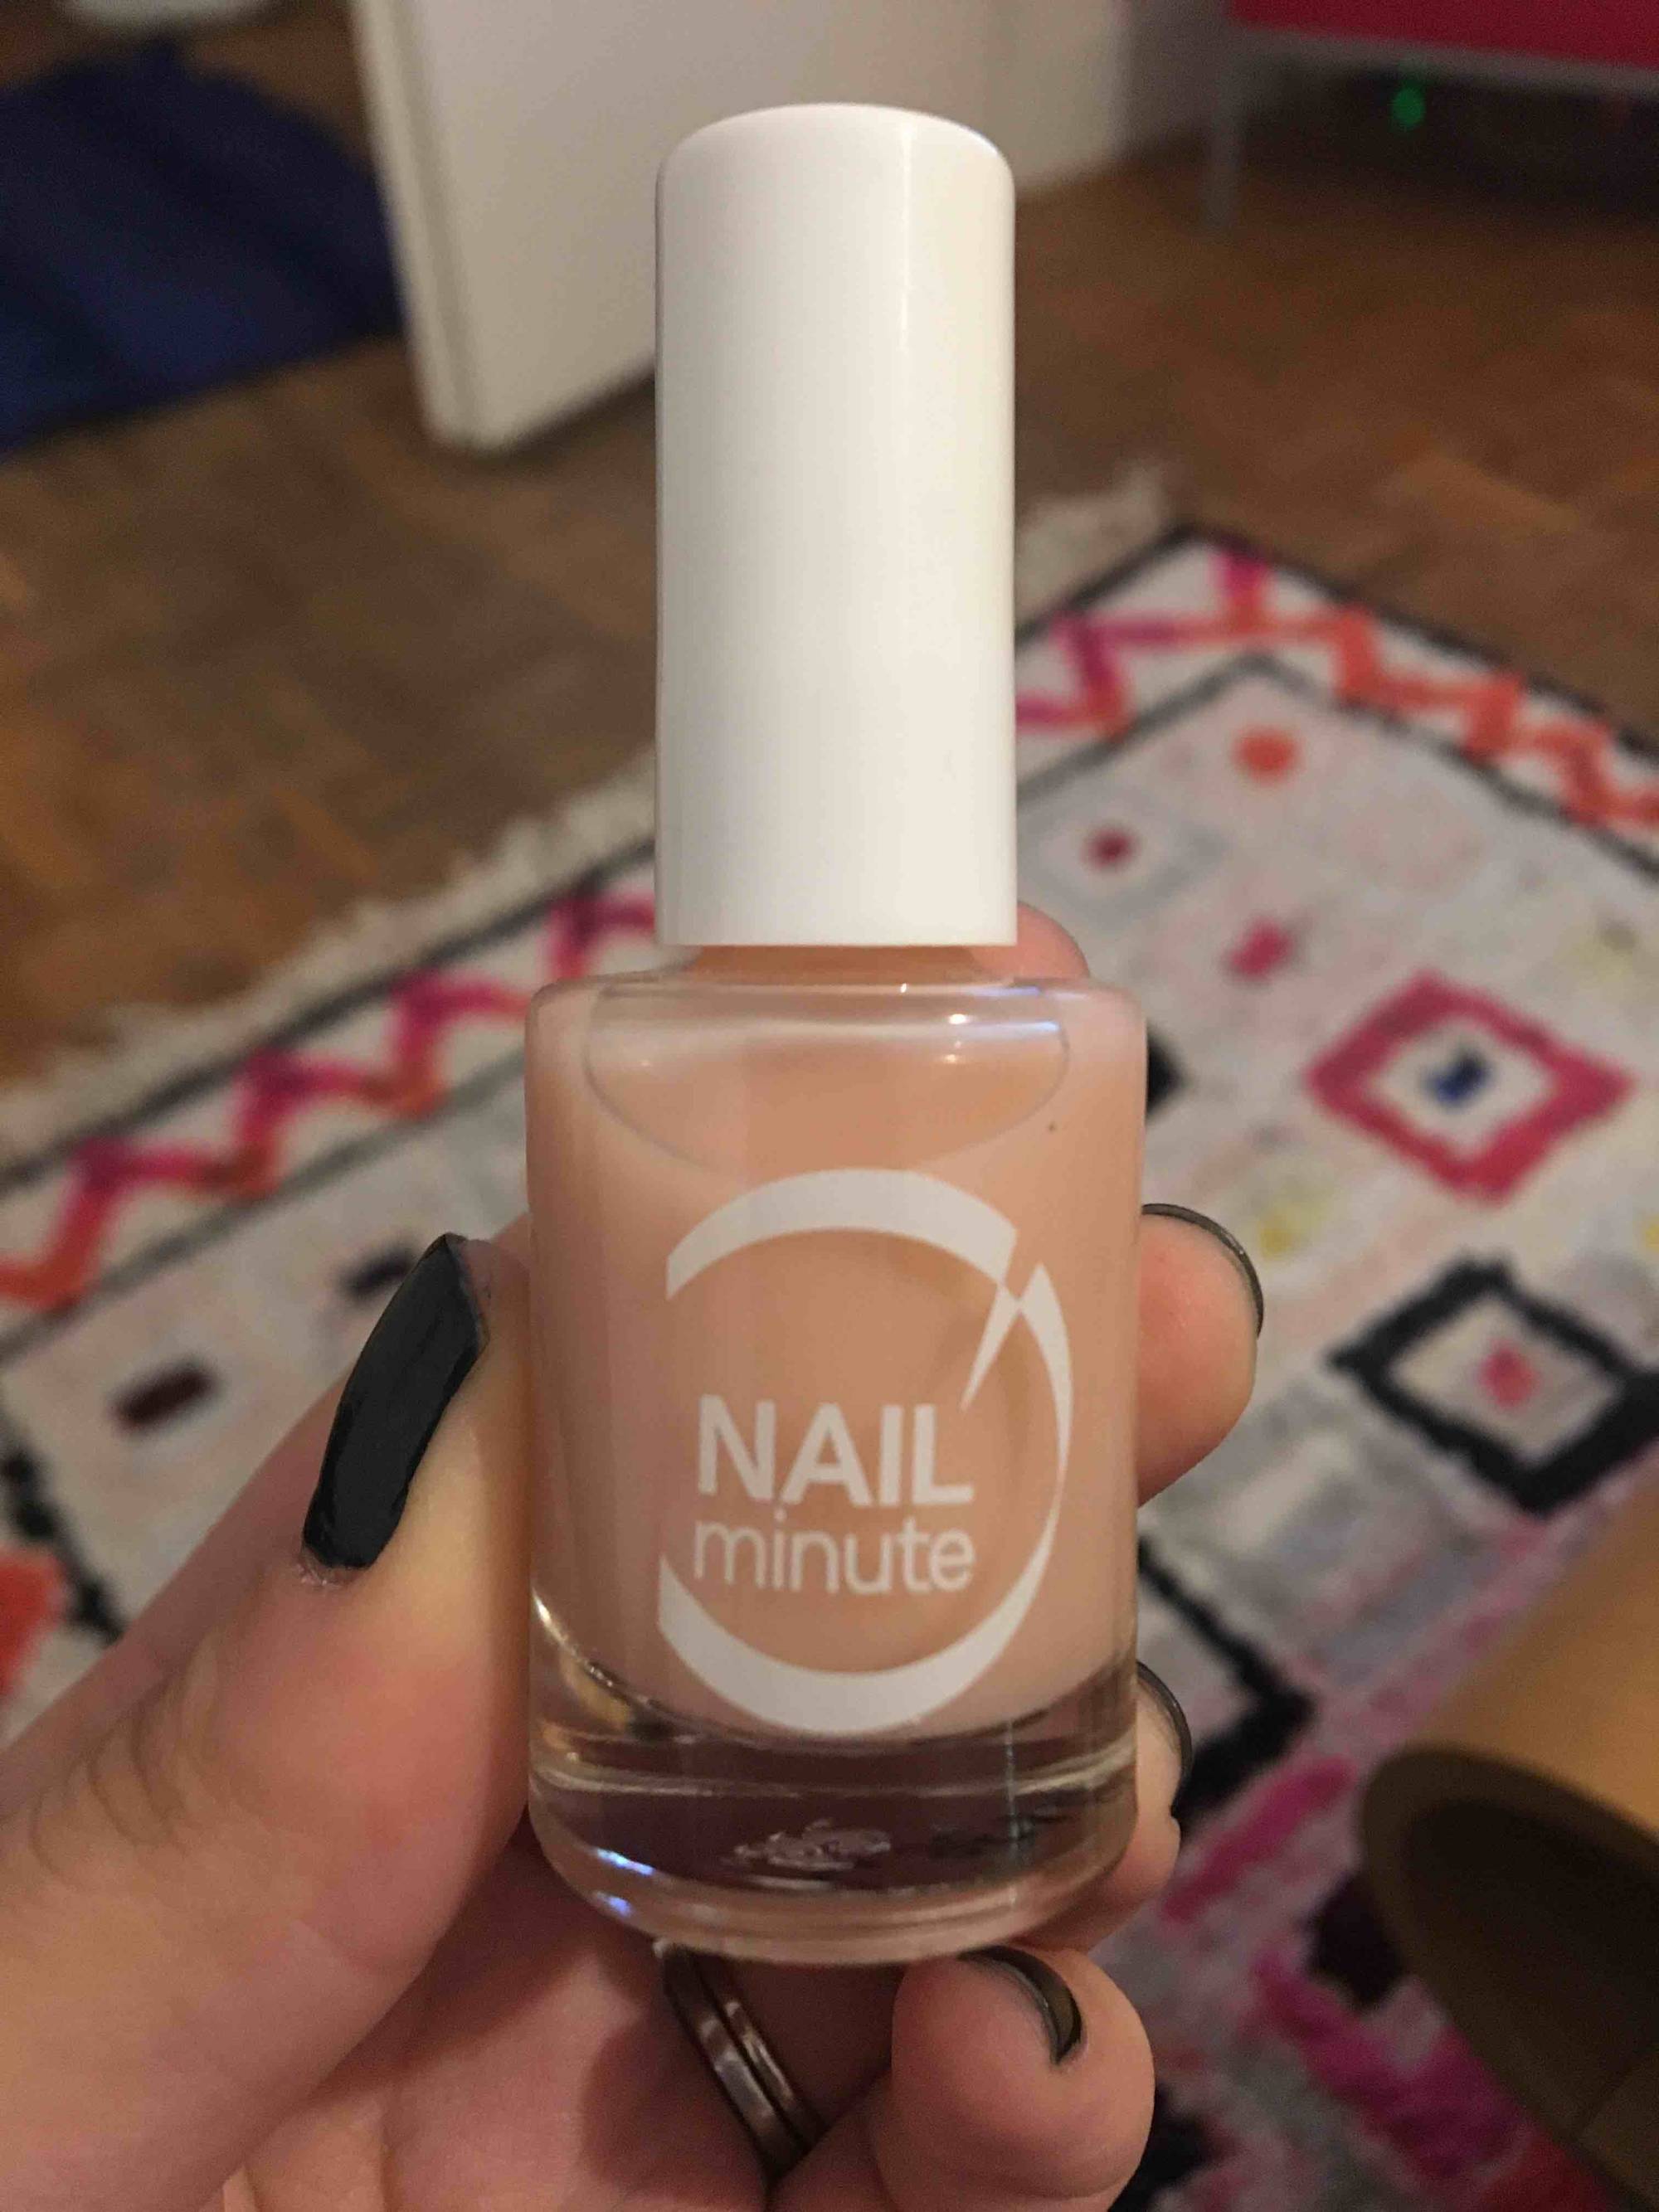 BODY'MINUTE - Nail minute